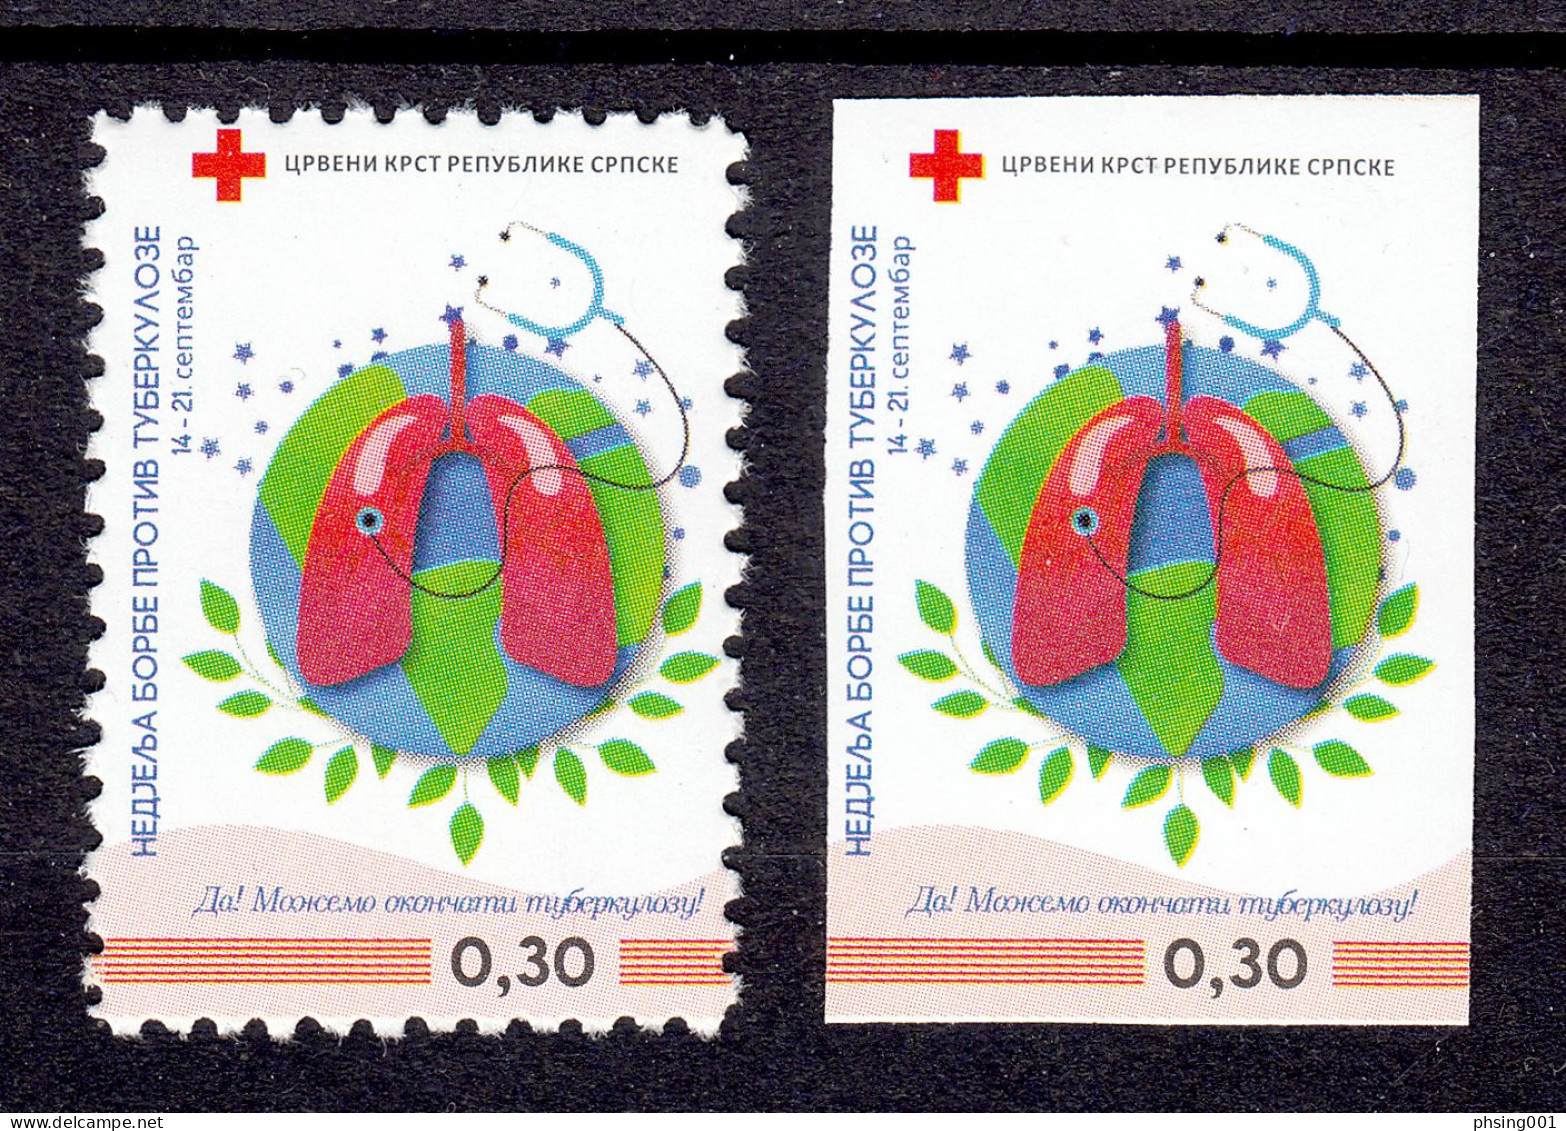 Bosnia Serbia 2023 TBC Red Cross Croix Rouge Rotes Kreuz Tax Charity Surcharge Perforated+imperforated Stamp MNH - Rotes Kreuz